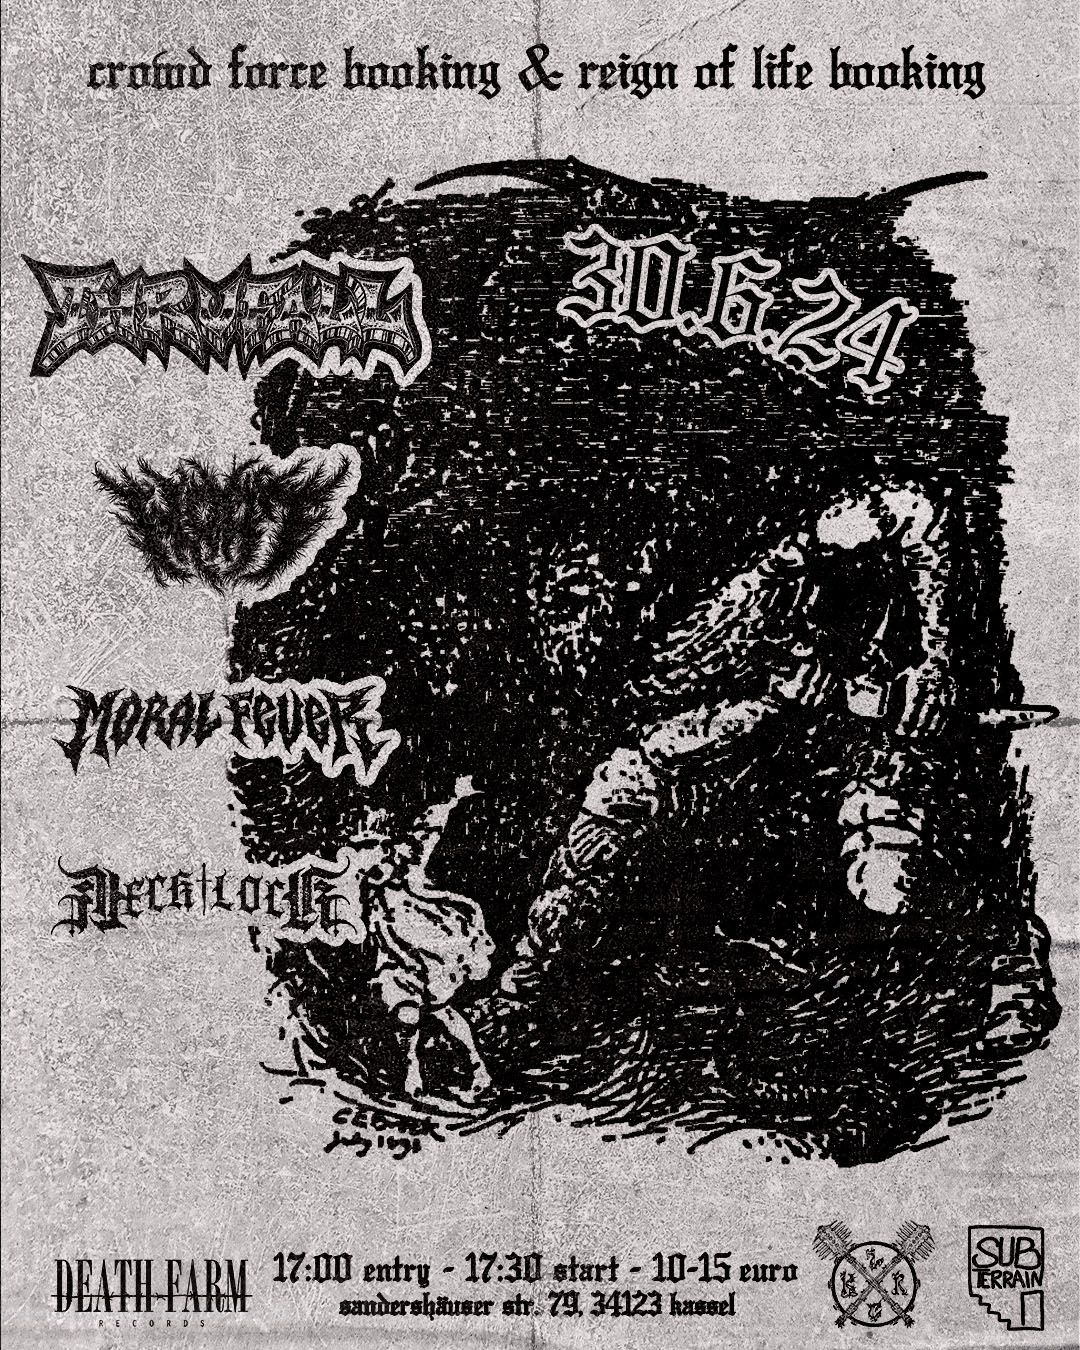 PRAY FOR SALVATION - KASSEL W\/THRUFALL, WOAT, MORAL FEVER AND NECK LOCK